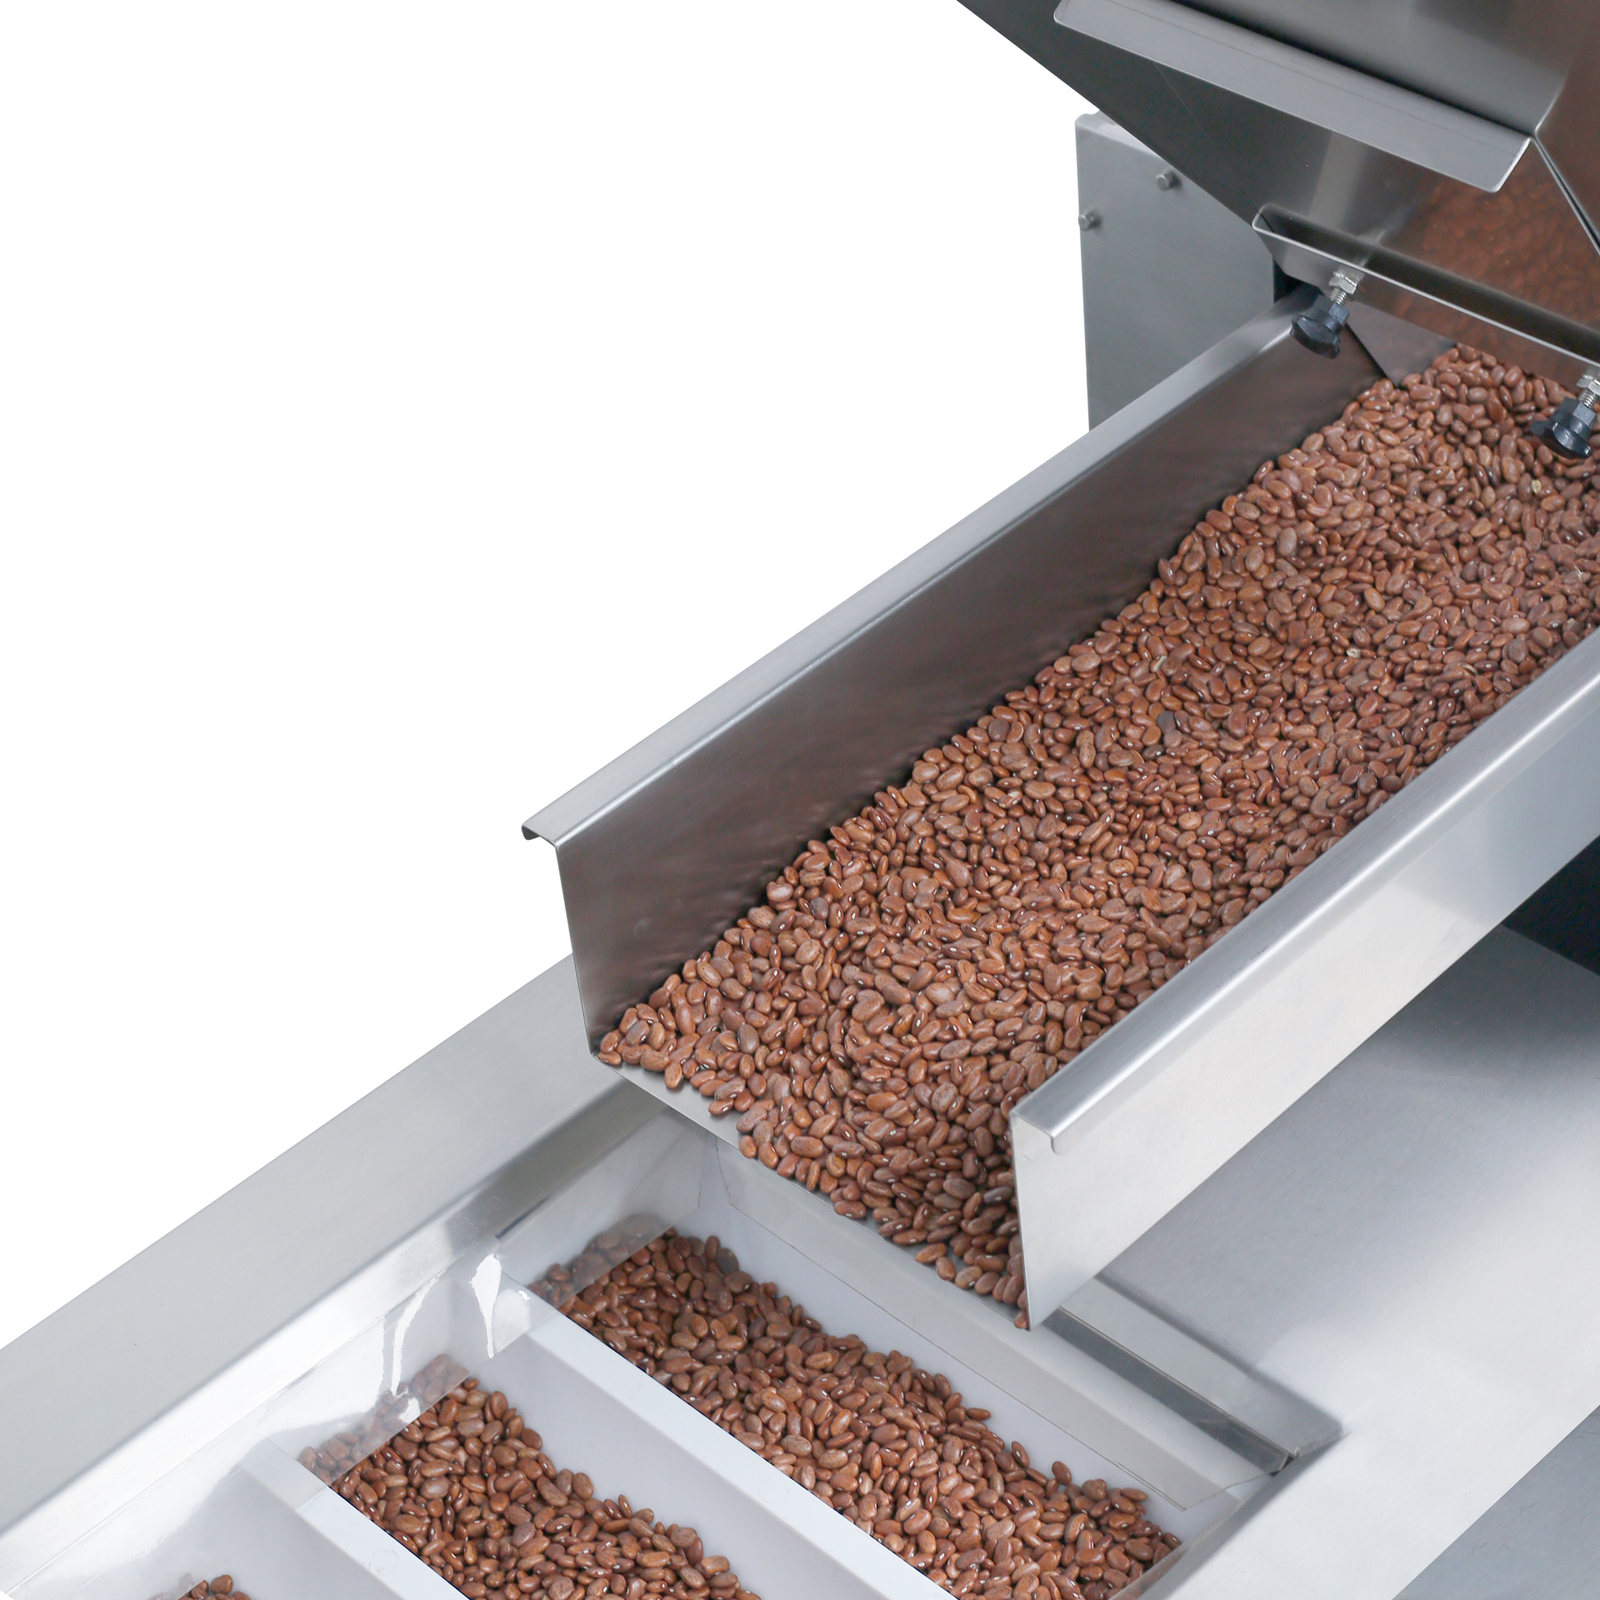 Close-up of the vibratory feeder dispensing red beans onto the moving conveyor of the JORES TECHNOLOGIES® stainless steel bucket elevator